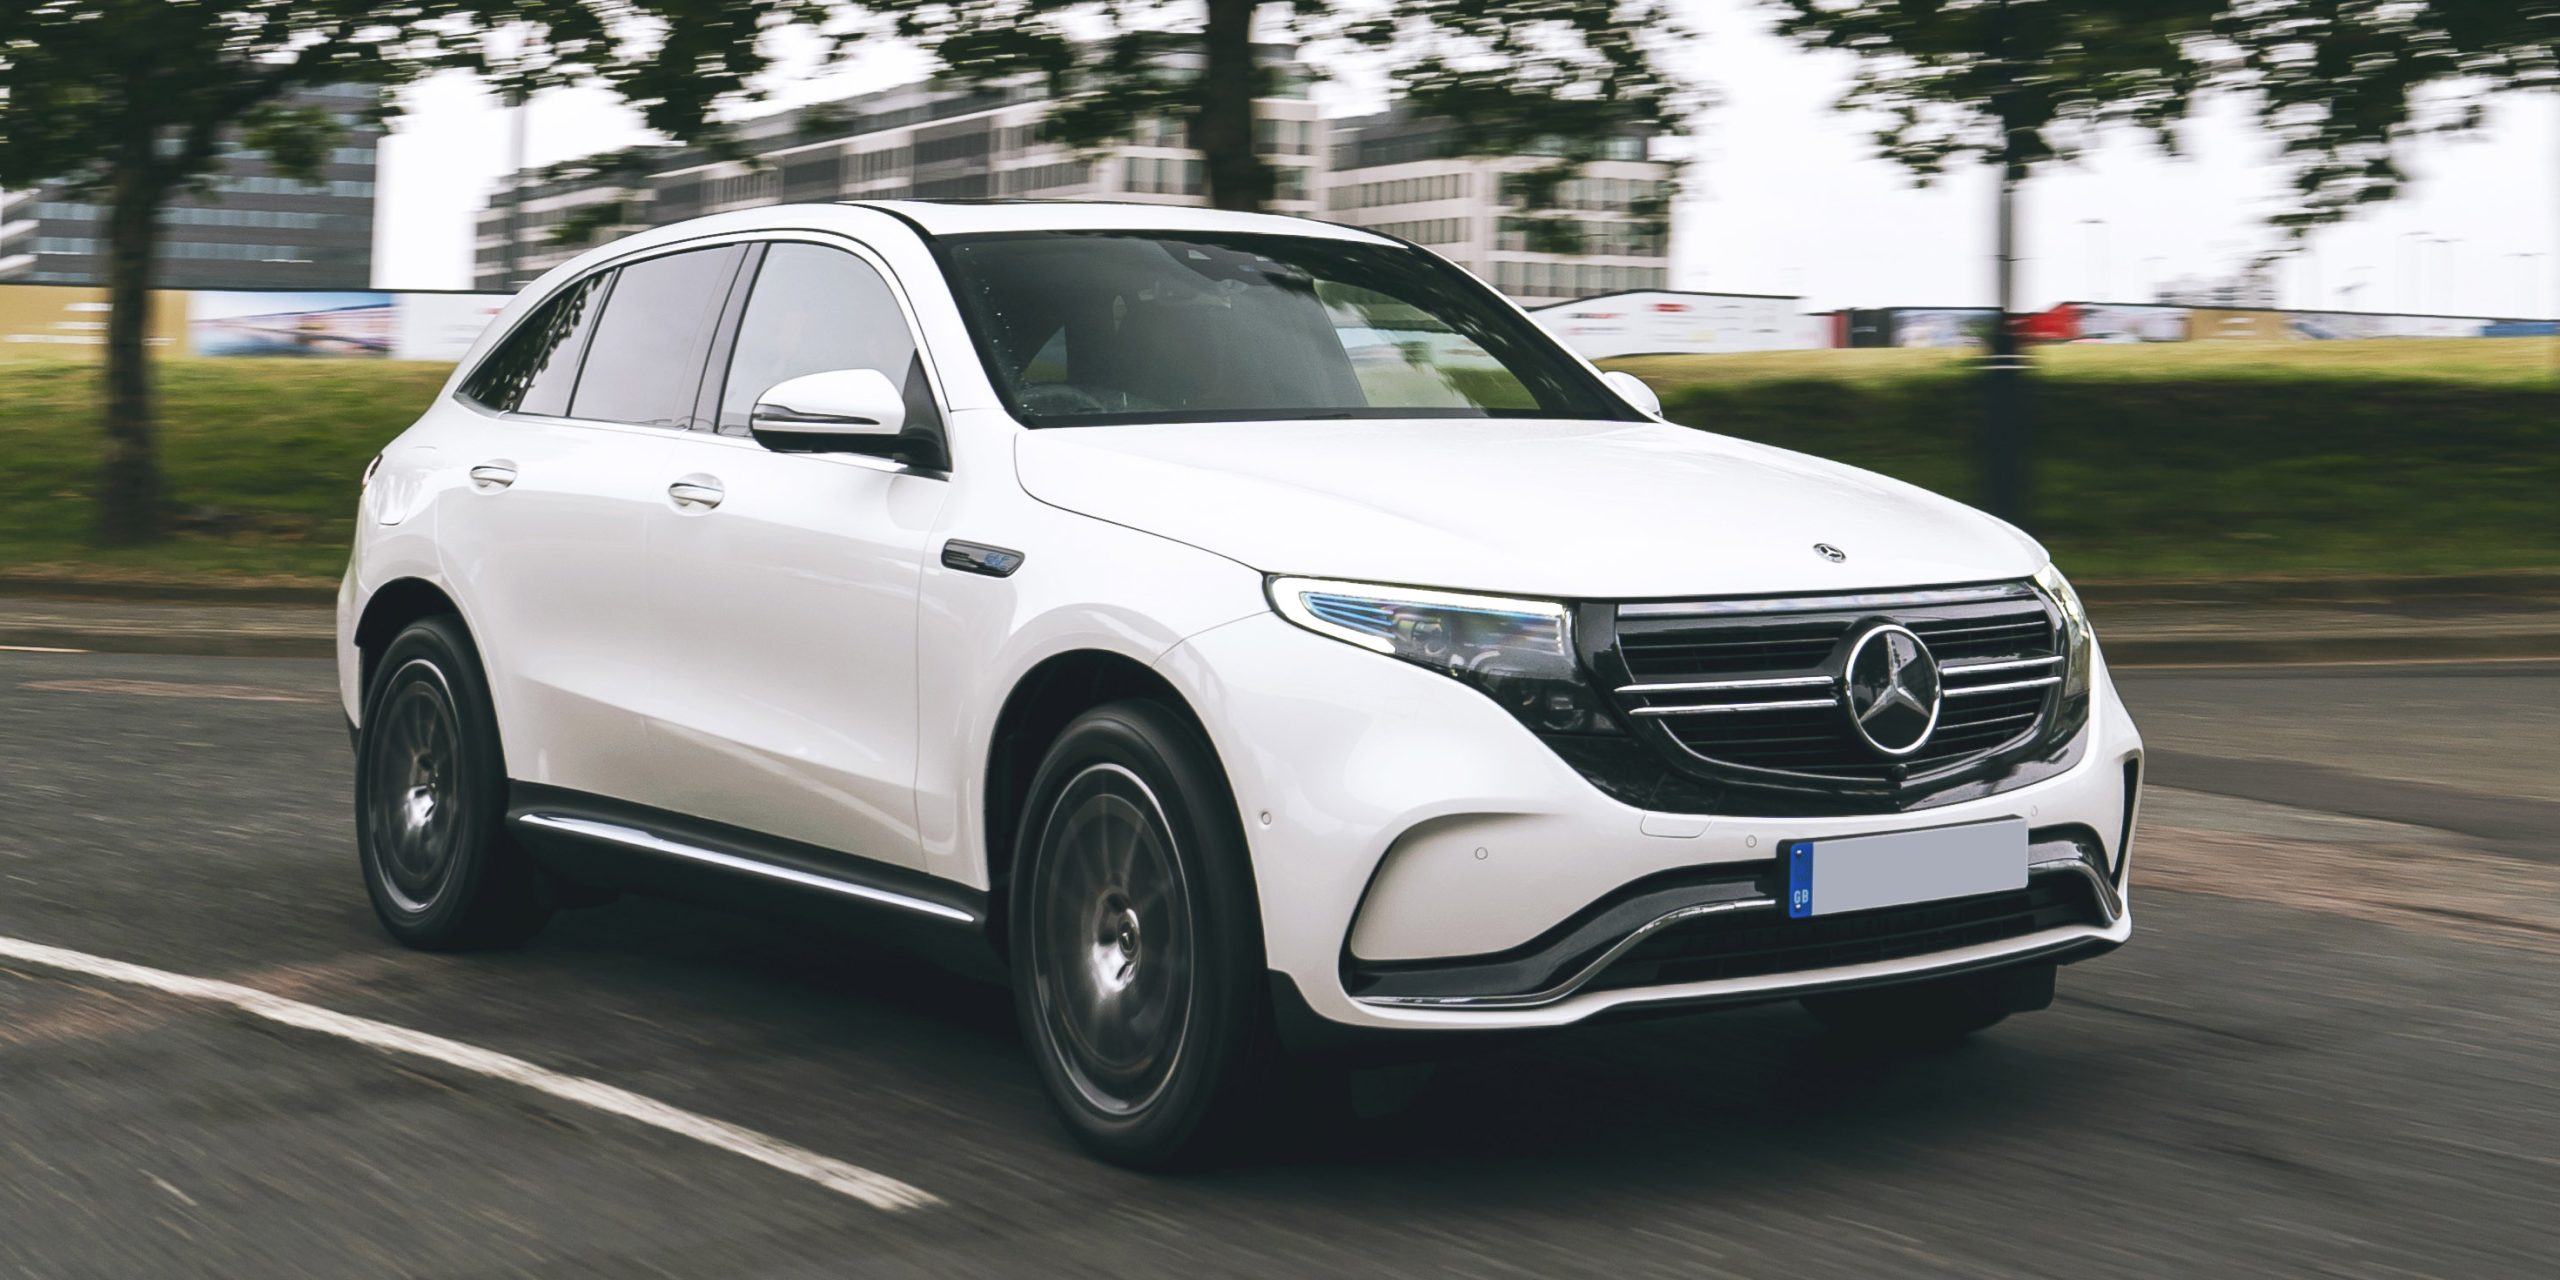 Mercedes-Benz EQC - Smartest Luxury Electric Cars